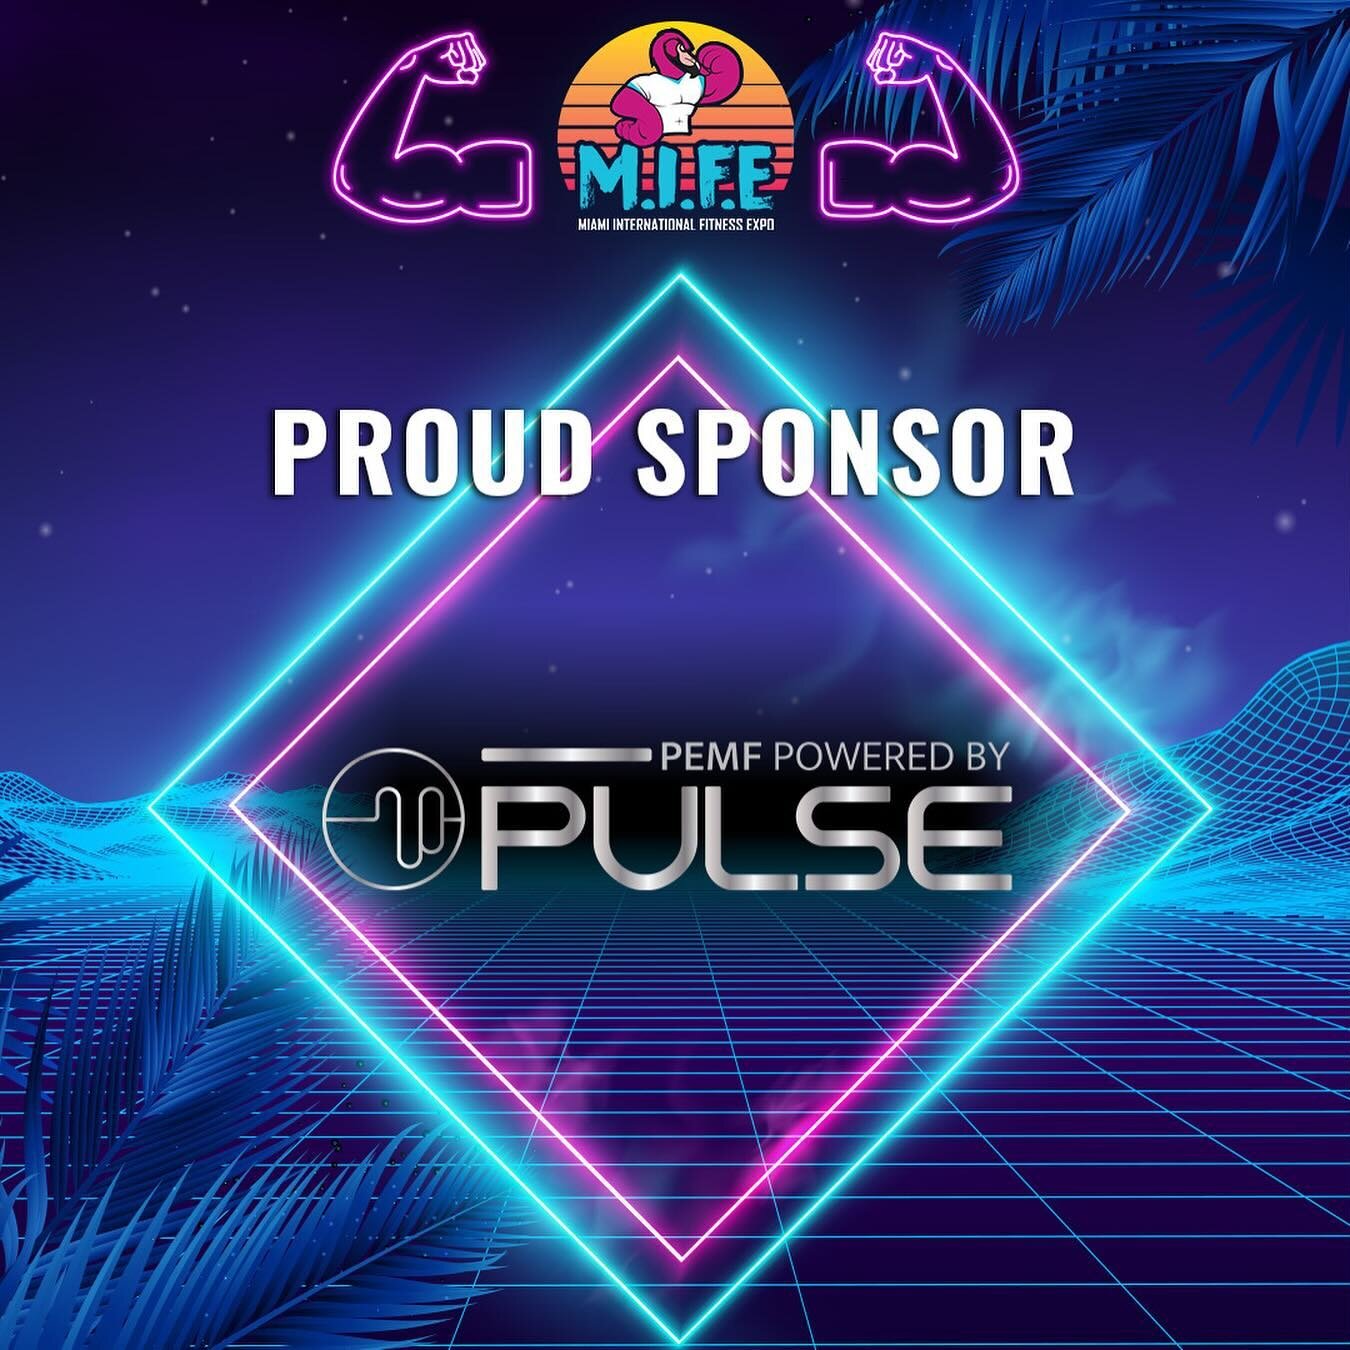 Experience luxury wellness with our proud sponsor @pulsepemf! 💆&zwj;♂️

Their innovative PEMF technology offers relaxation &amp; rejuvenation like never before. Don't miss out&mdash;discover the difference today! 💫 

#LuxuryWellness #PEMFTechnology